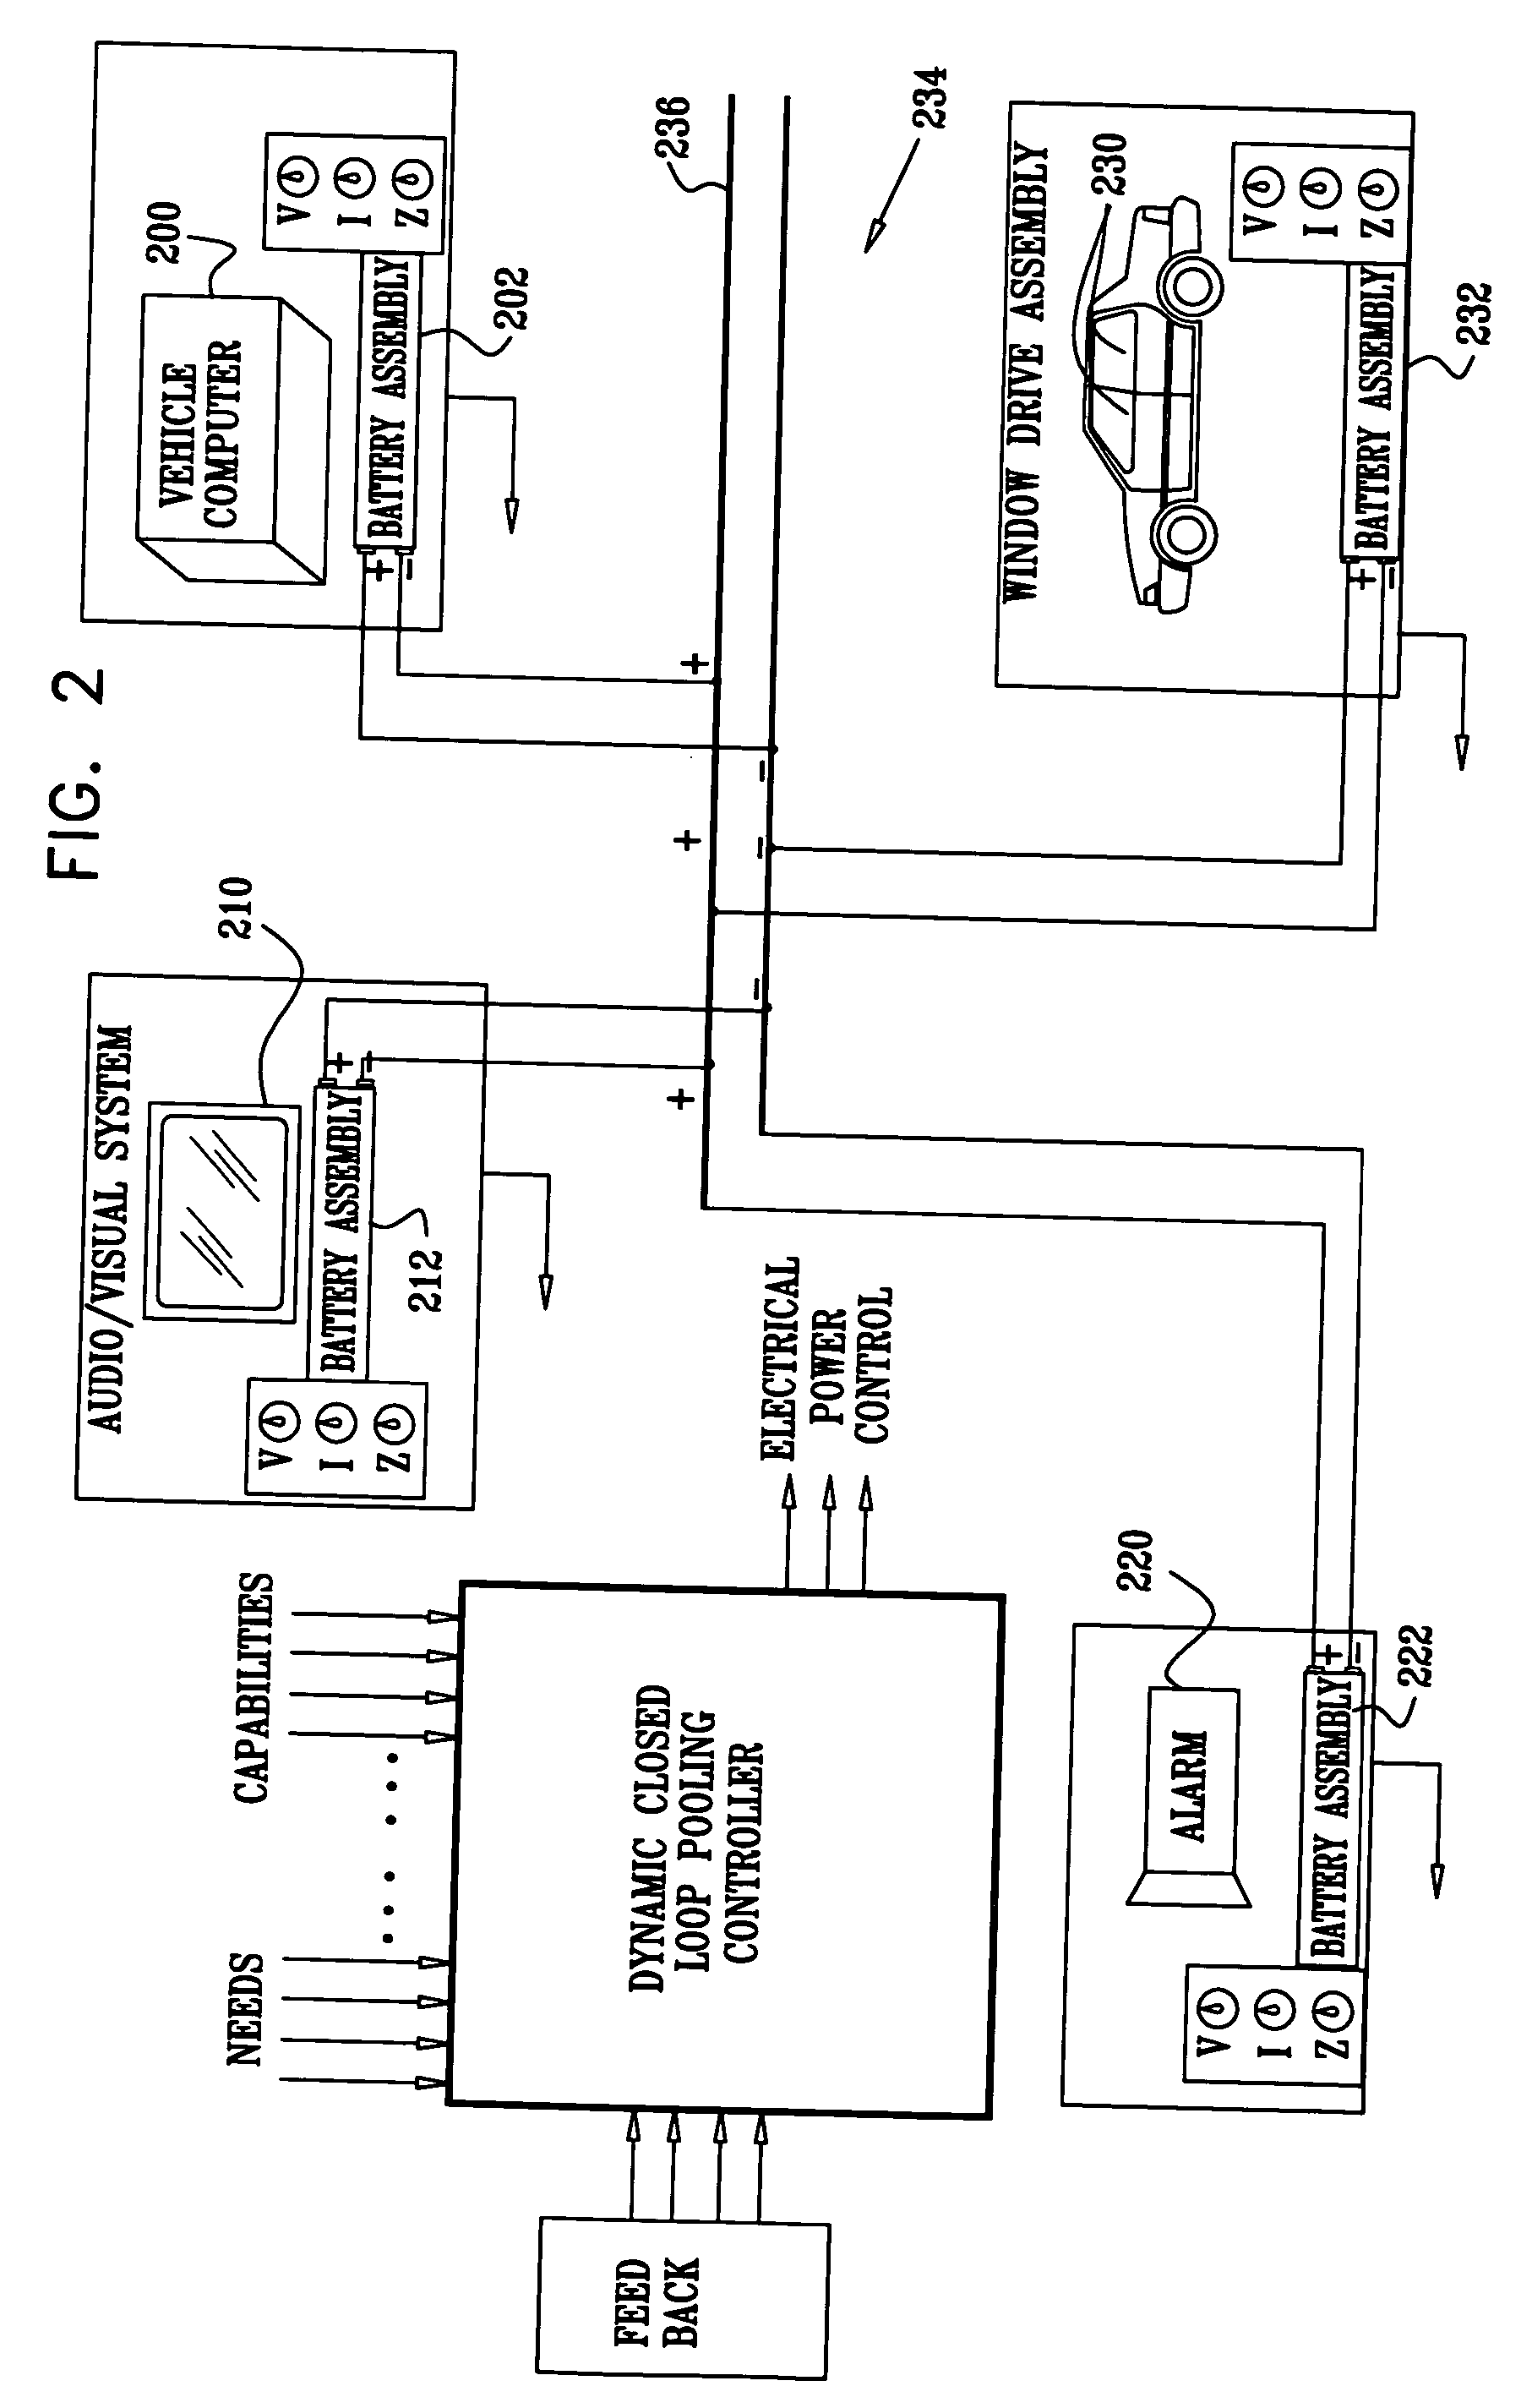 Power over ethernet switch node for use in power pooling